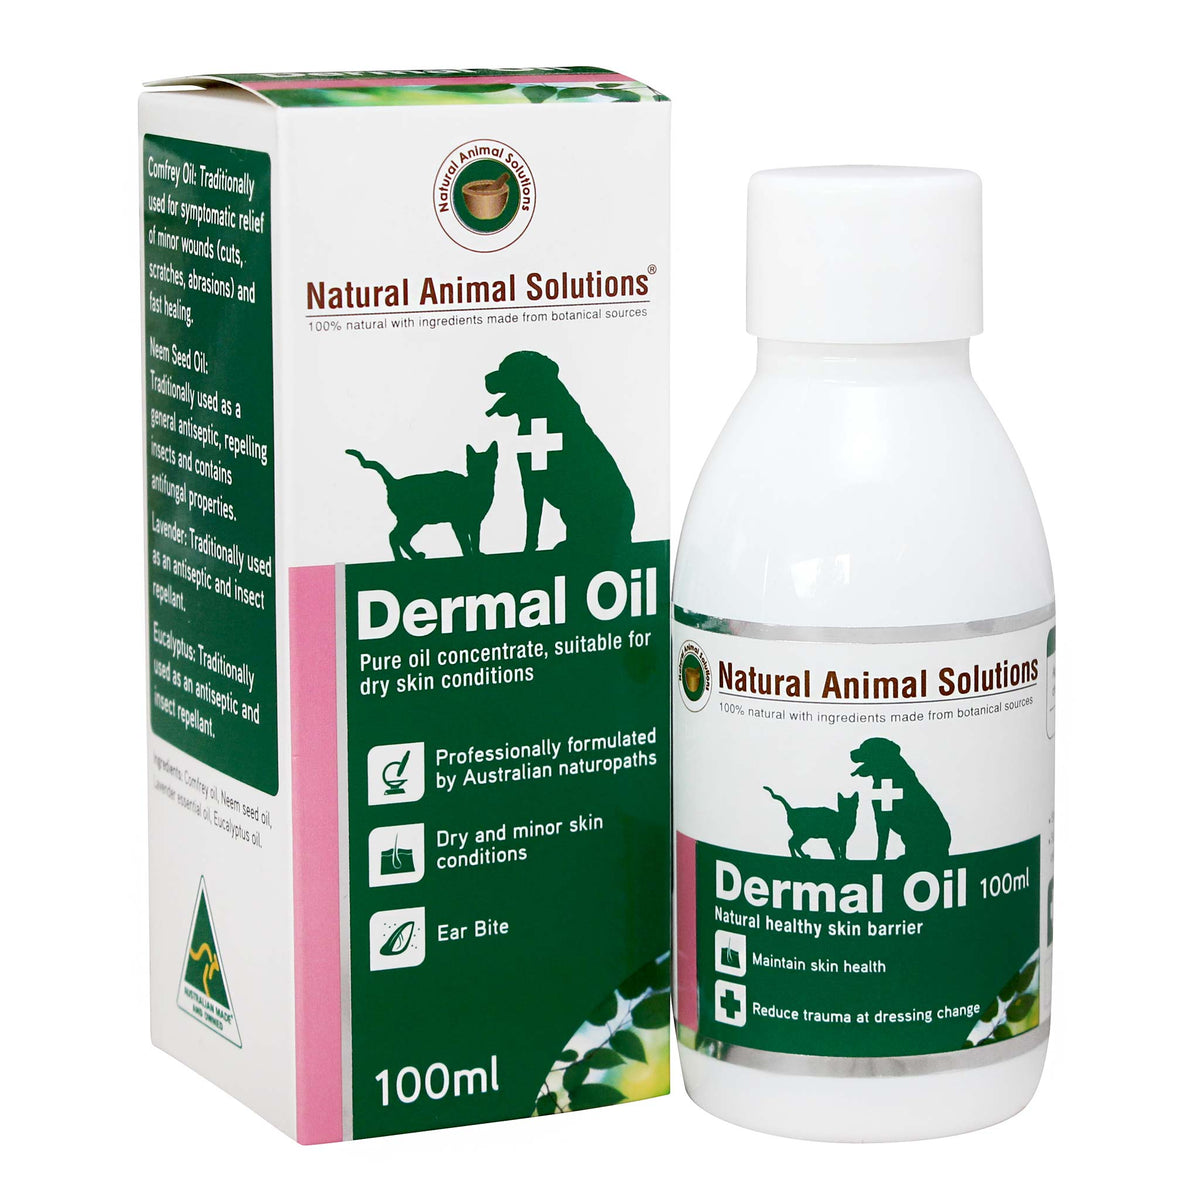 Natural Animal Solutions Dermal Oil Concentrate 100mL